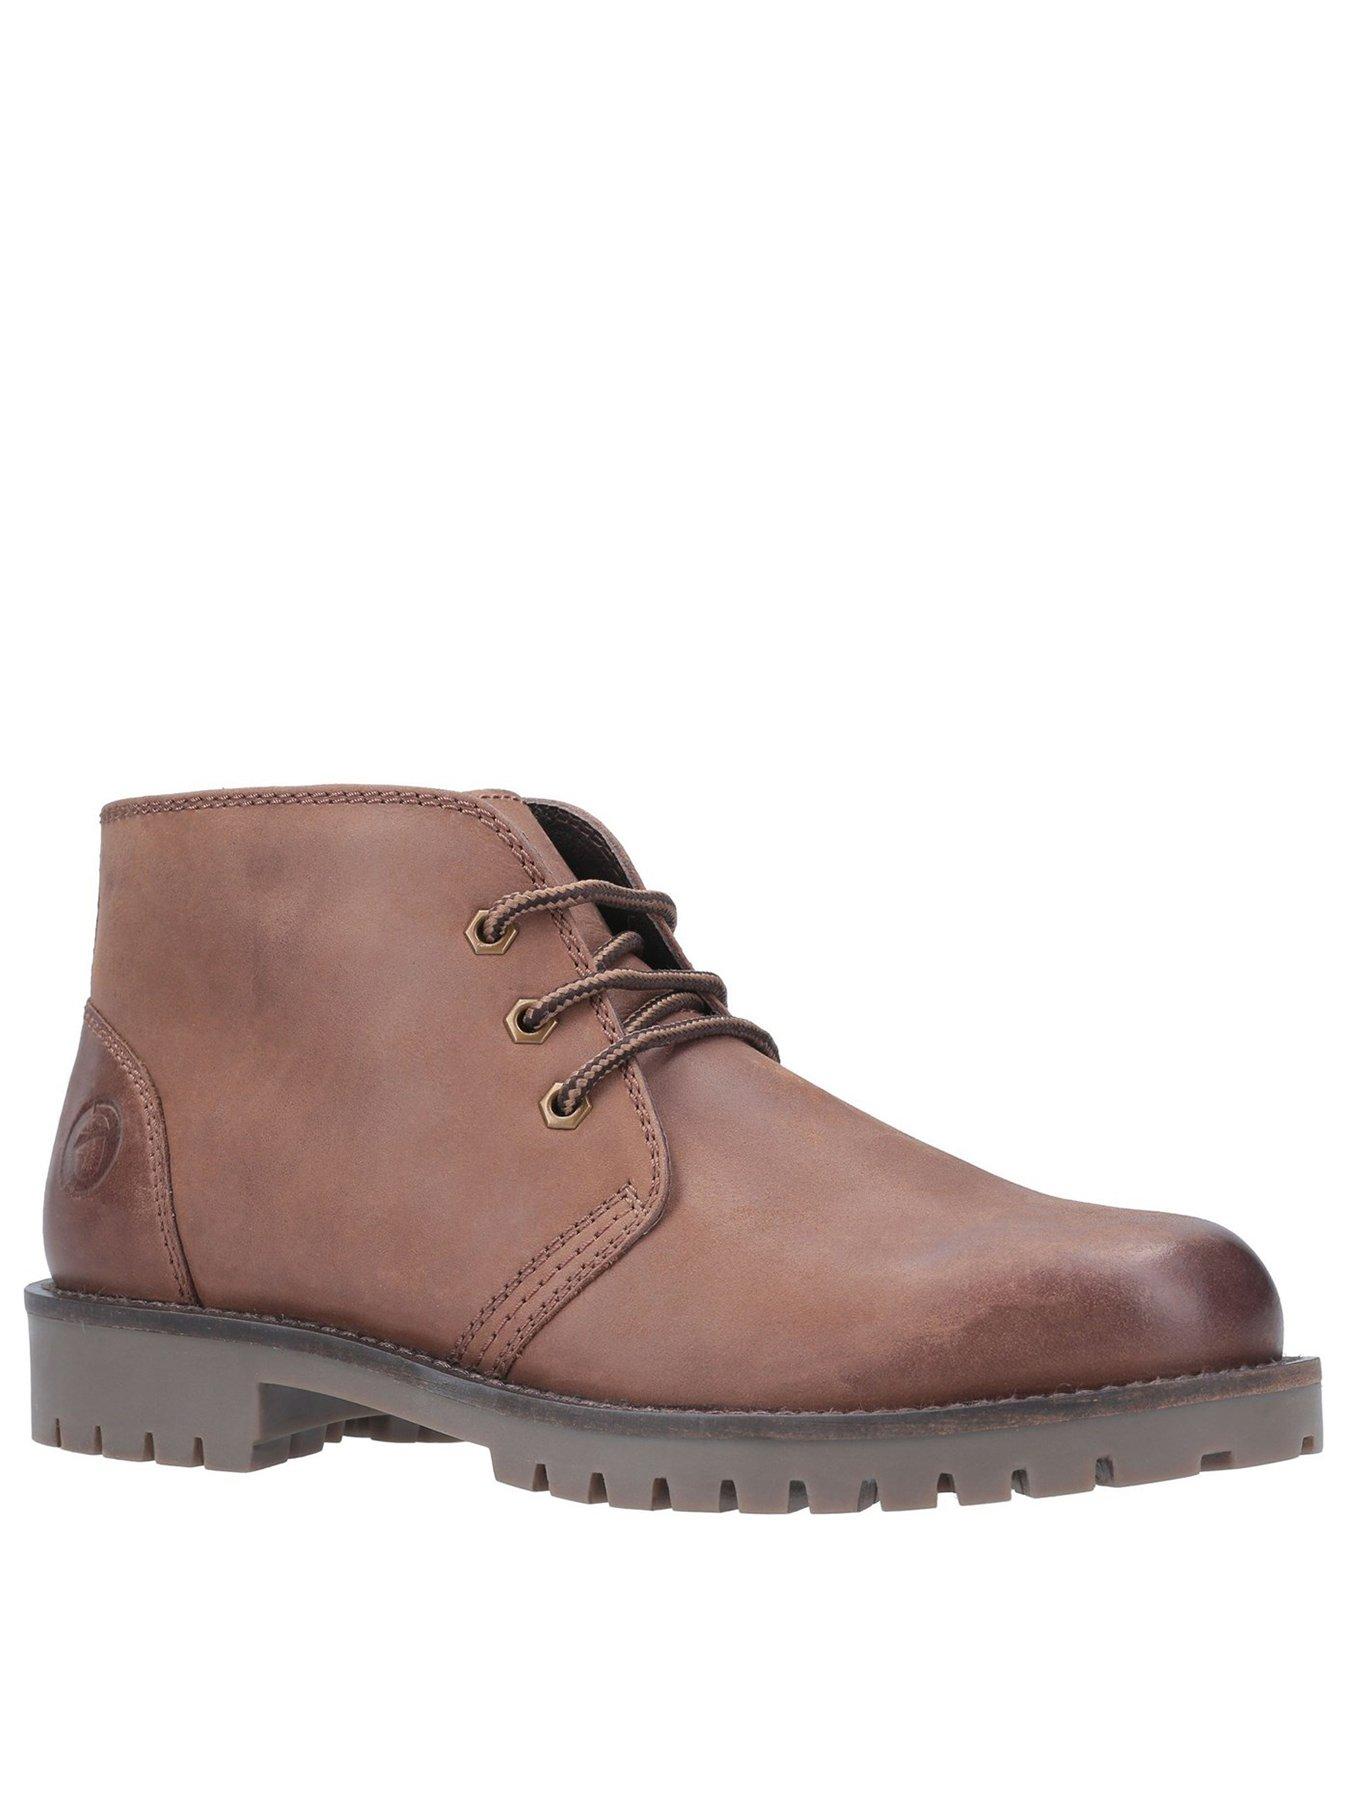 Shoes & boots Stroud Leather Boots - Tan